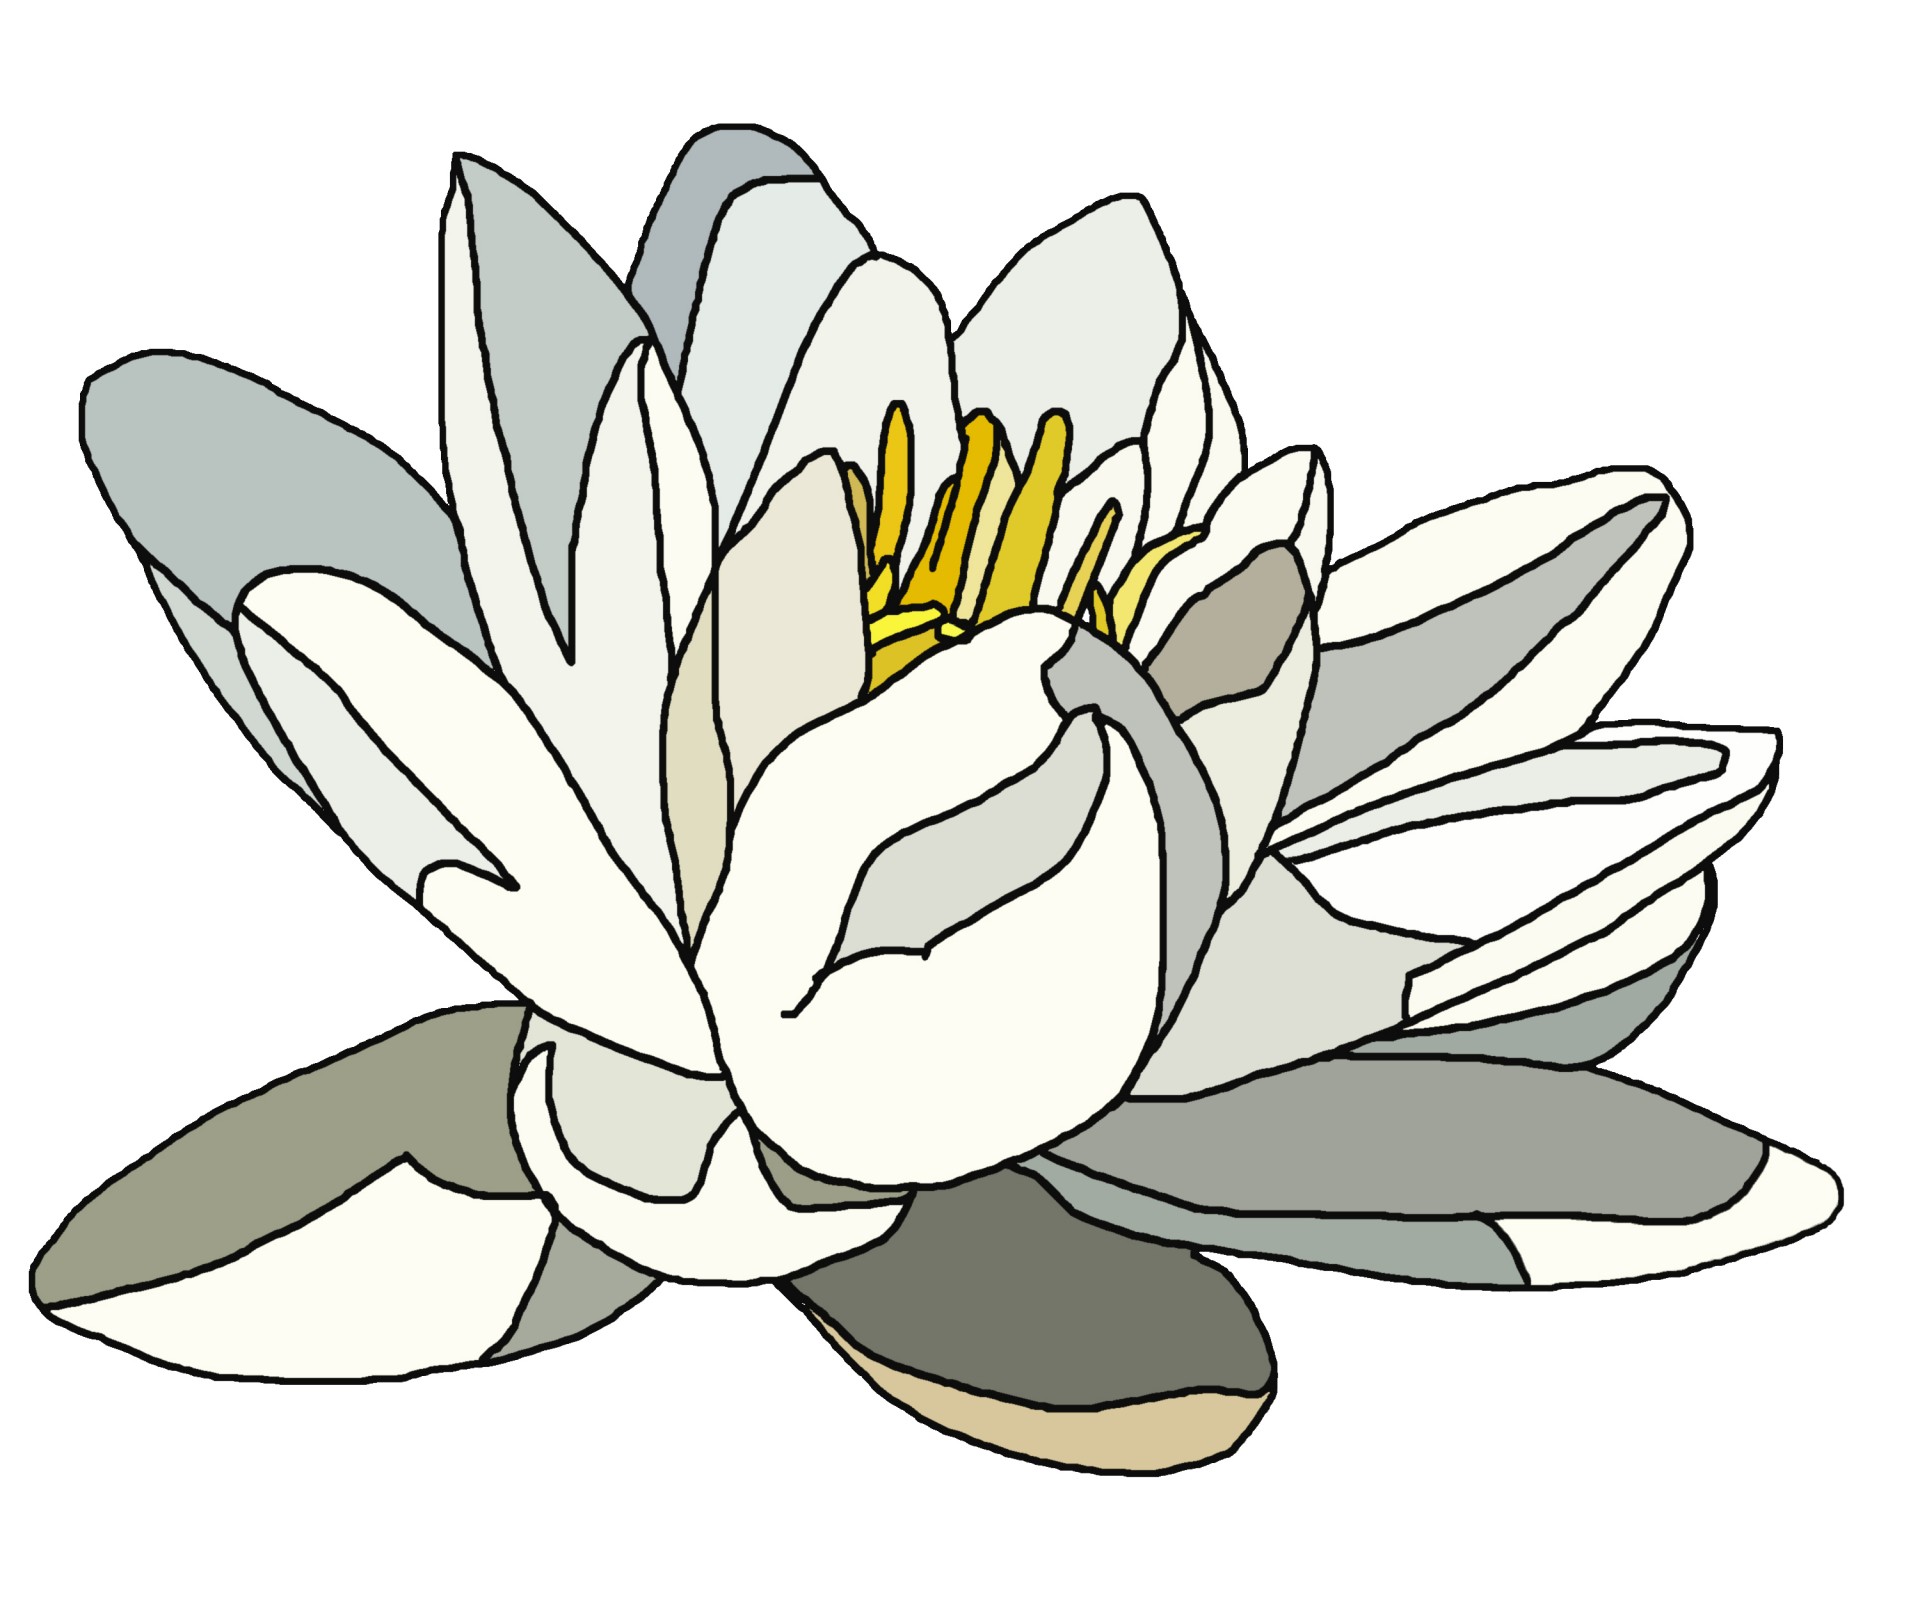 water lily illustration free photo